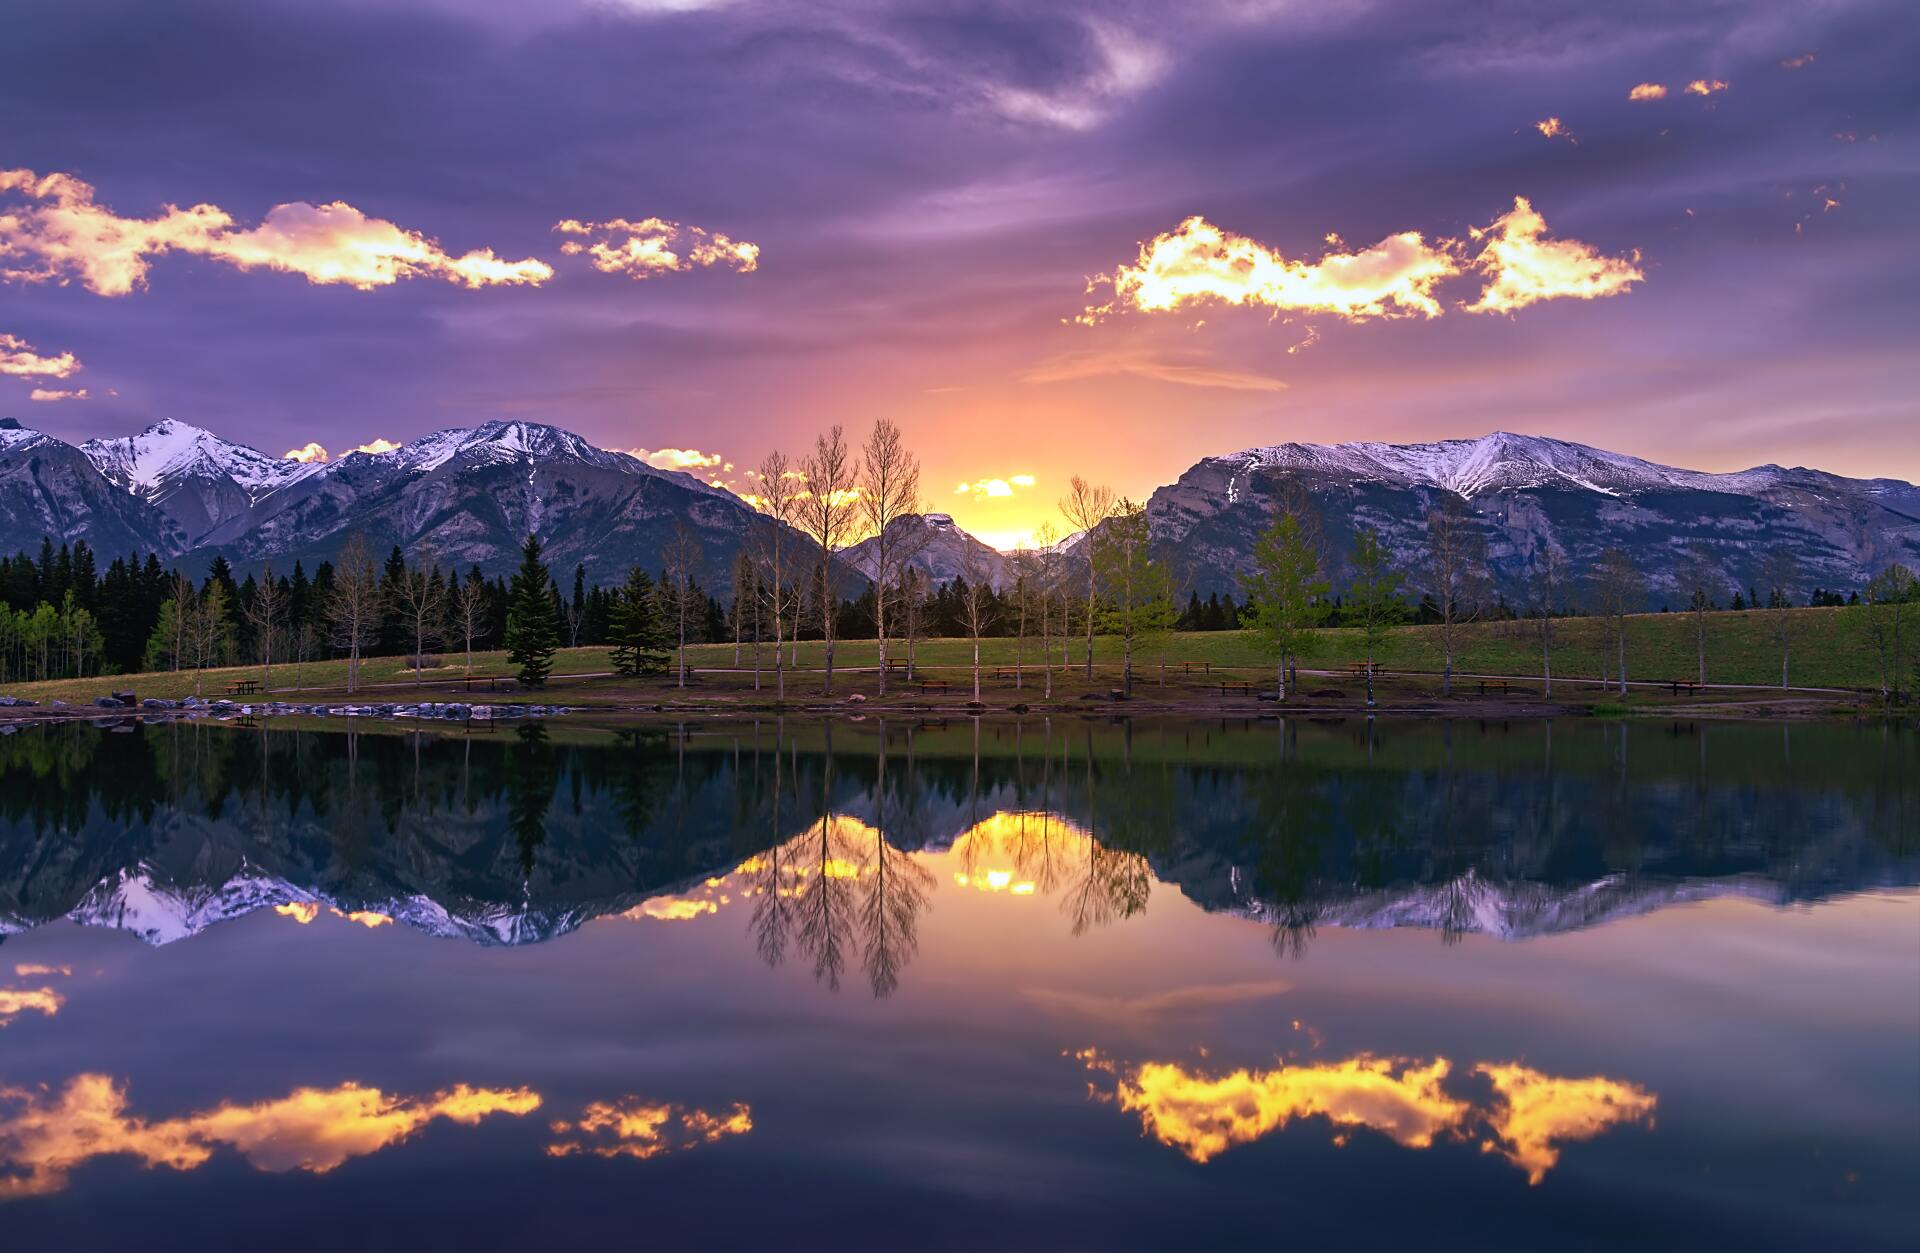 A sunset over a lake with mountains in the background